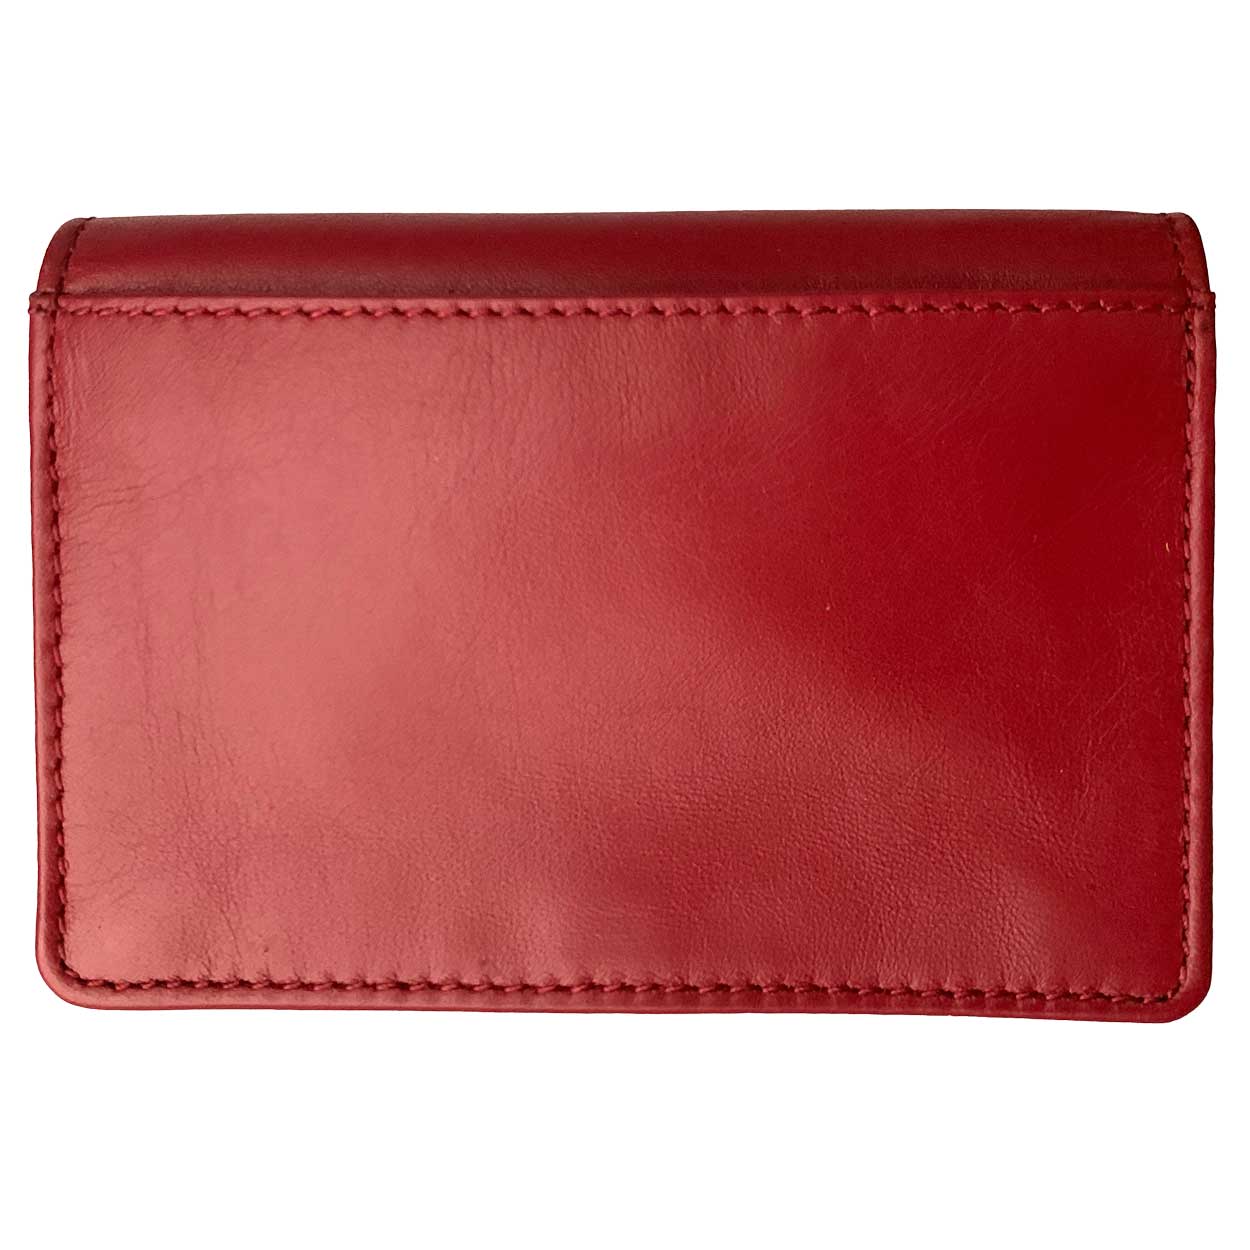 DiLoro Italy RFID Blocking Bifold Slim Genuine Leather Business Card Wallet Venetian Red - Back View